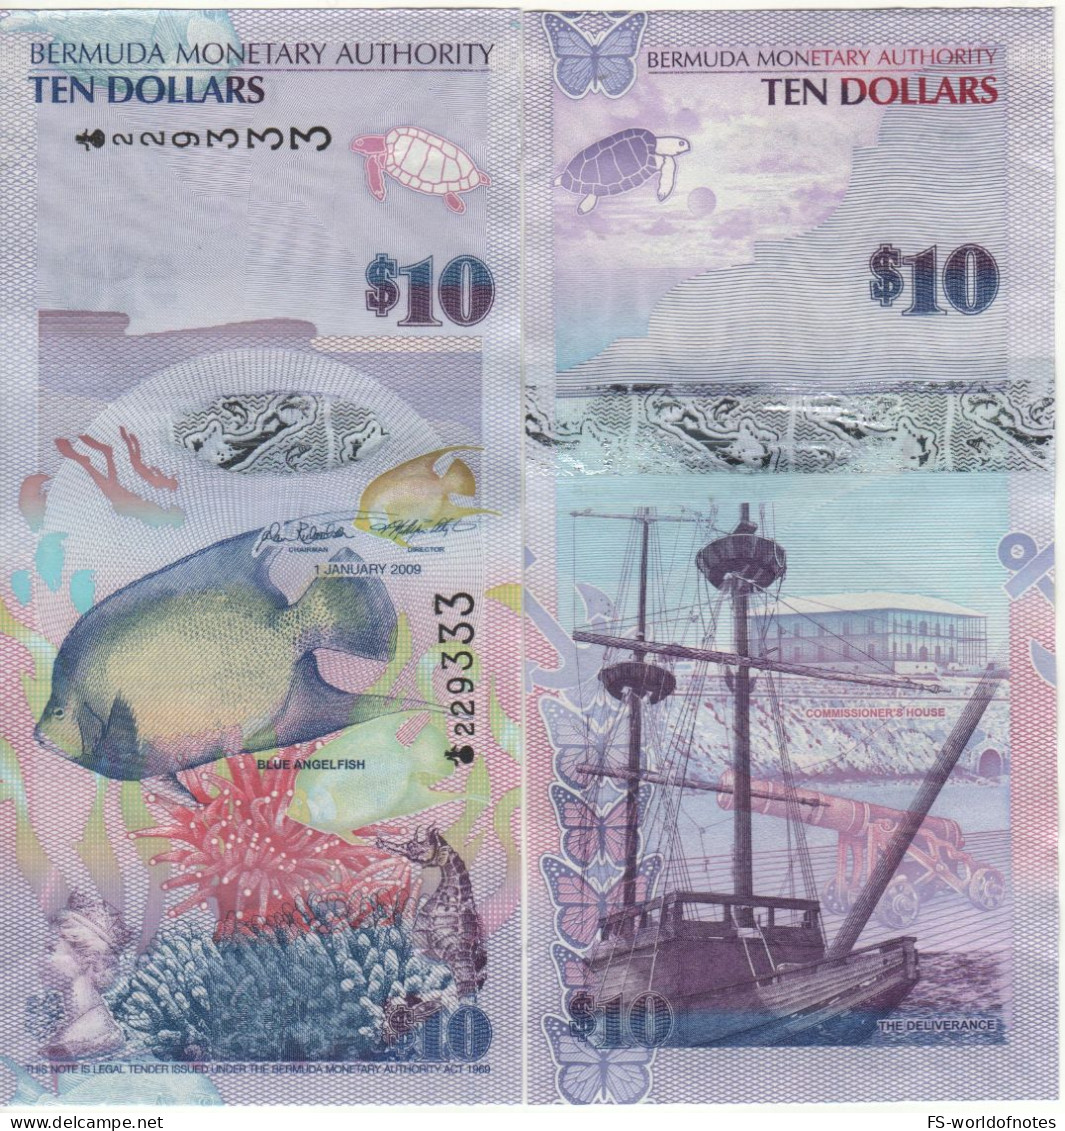 BERMUDA  10 Dollars P59a  2009  ( Blue Angel Fish + Sailing Boat, Butterfly  Commissioner's House At Back )  UNC - Bermuda